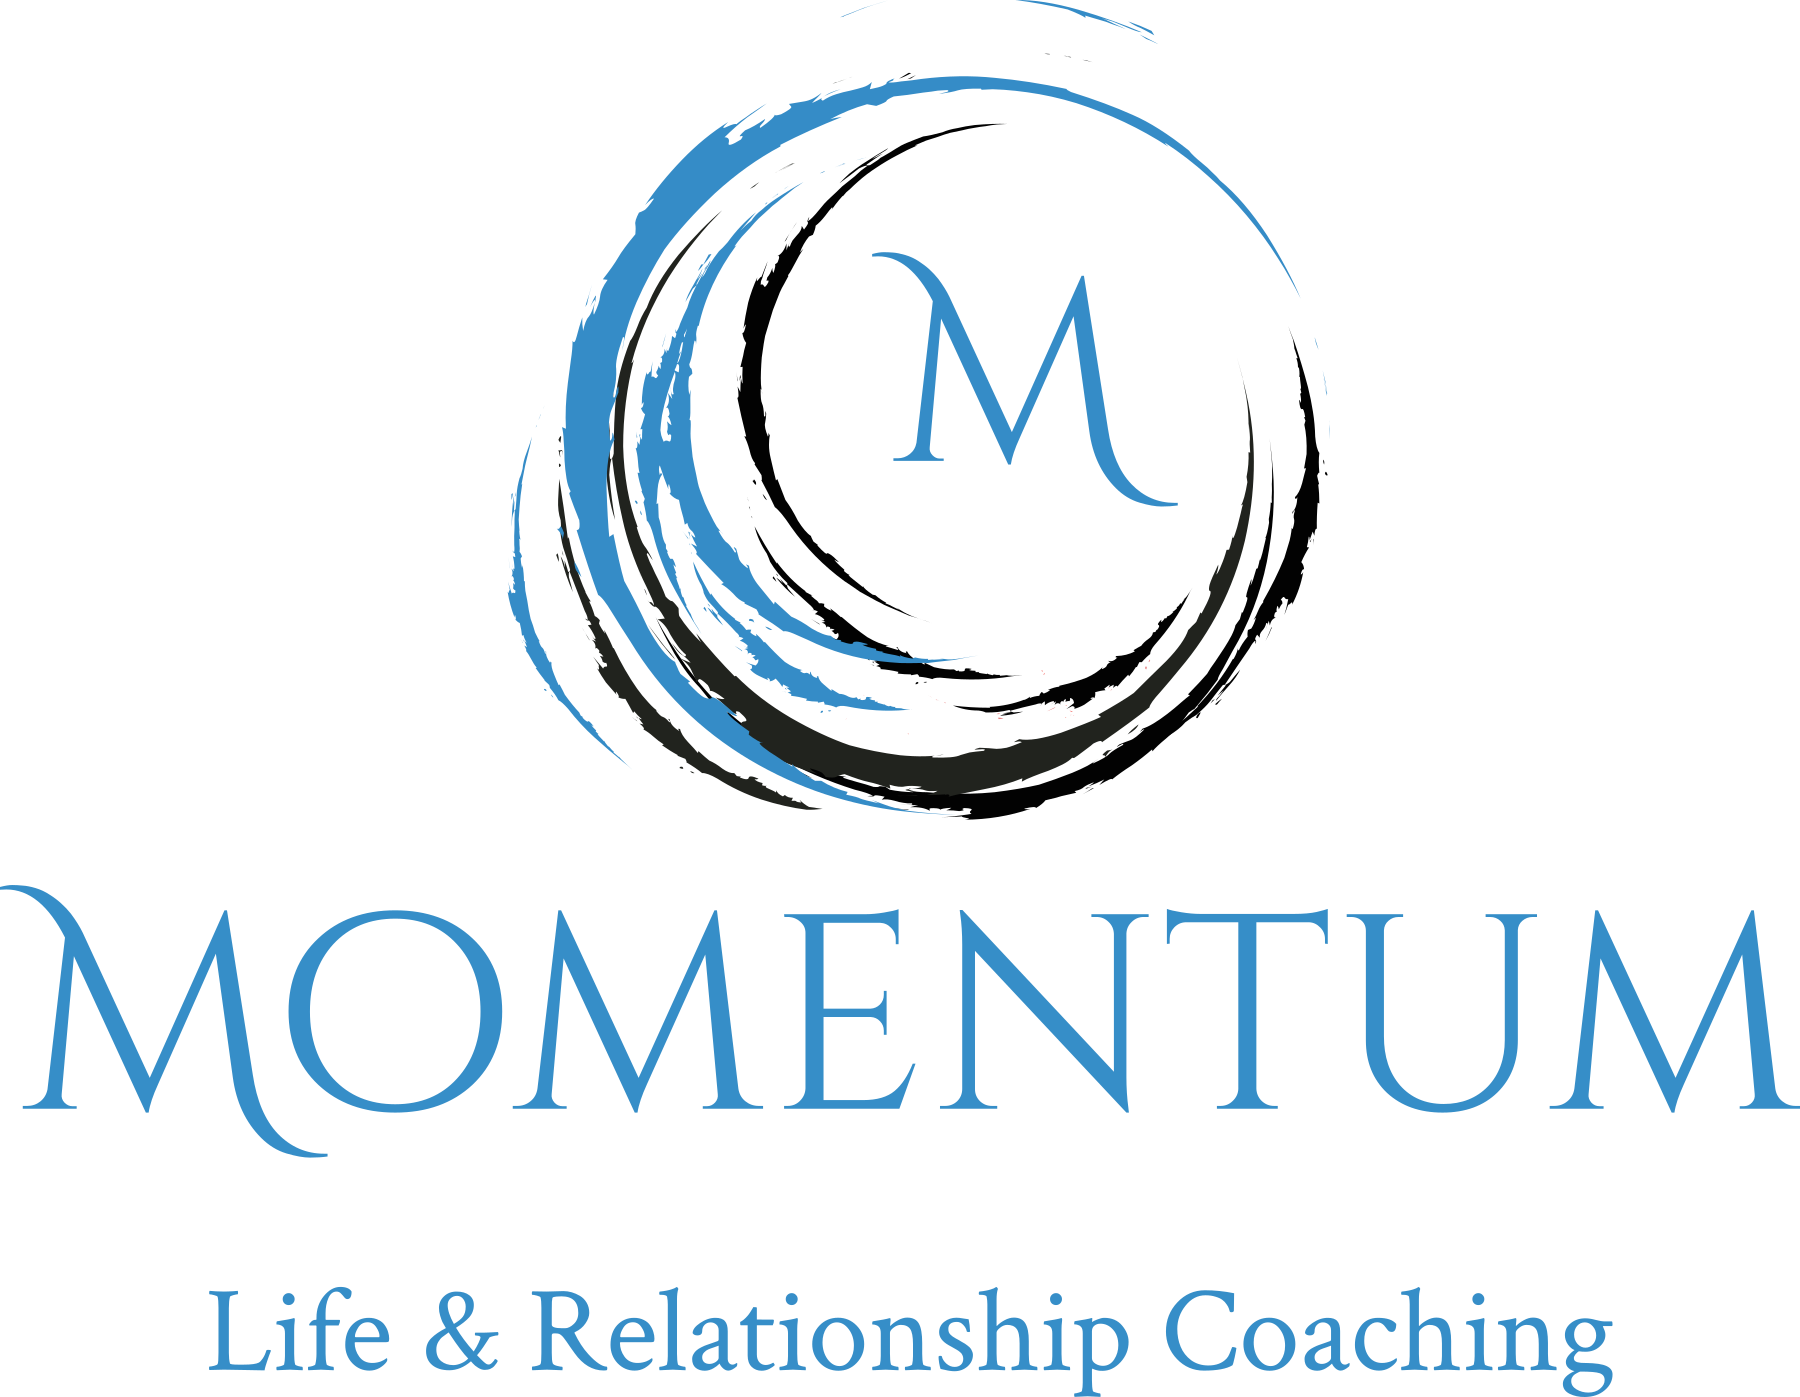 Momentum LRC | Life & Relationship Coaching & Consulting